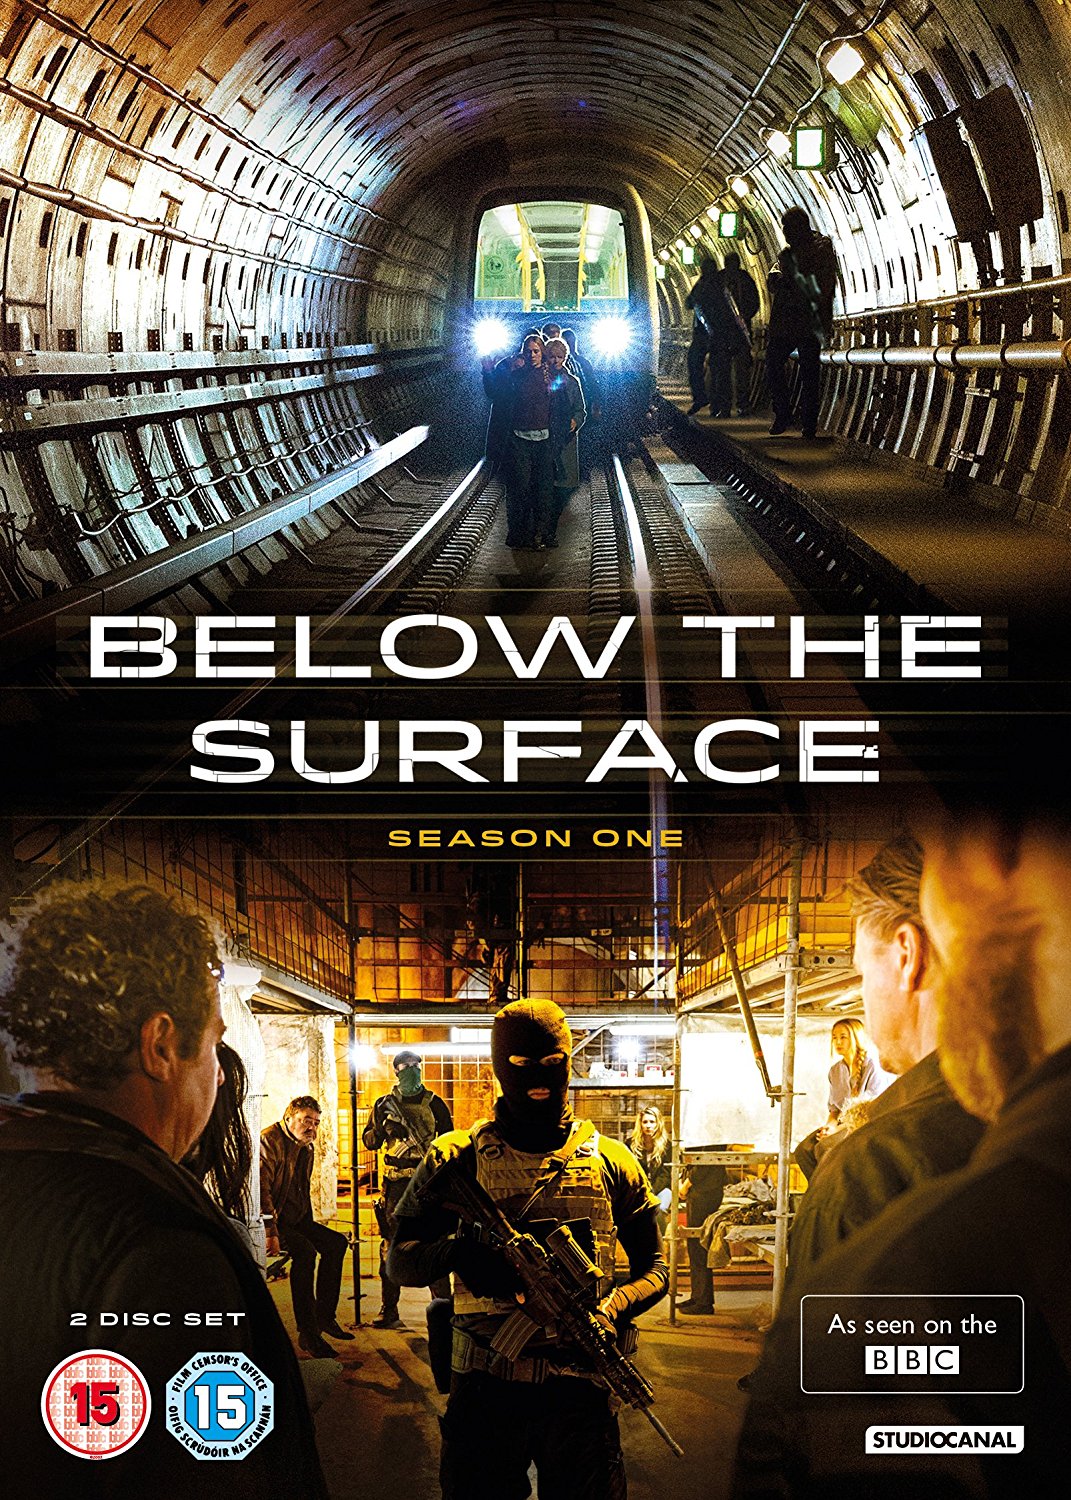 boom competitions - win a copy of Below the Surface on DVD